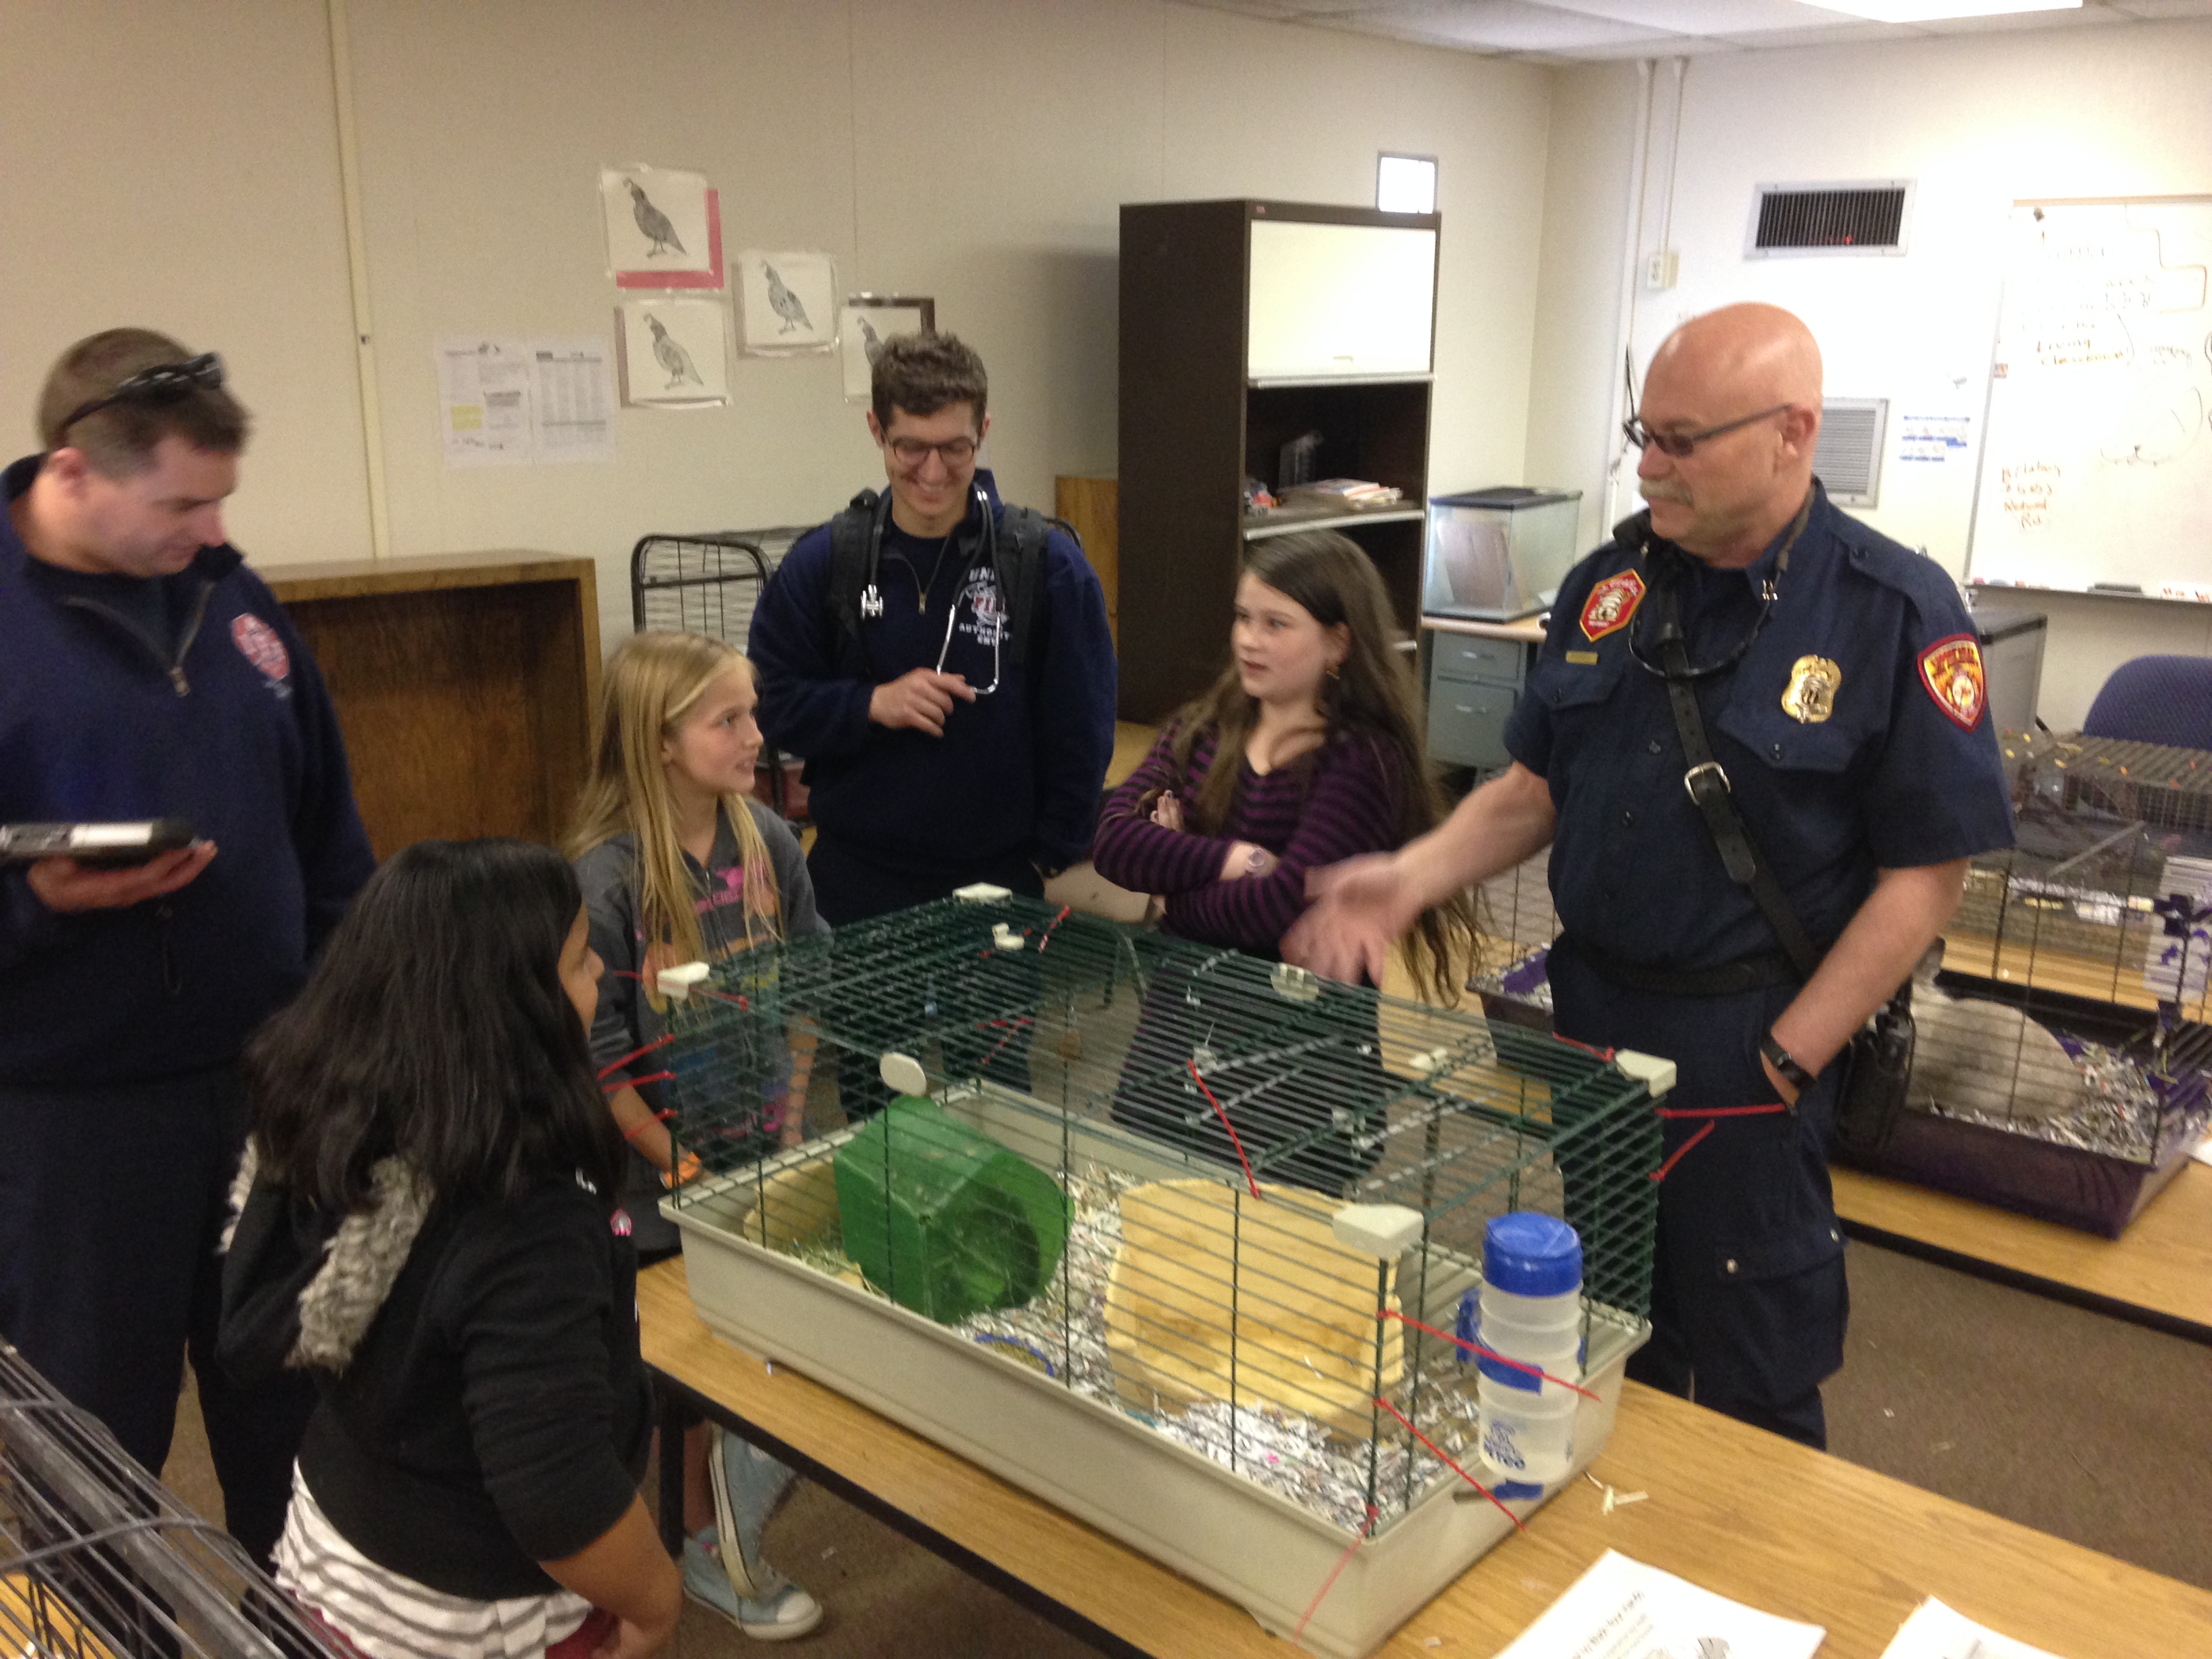 Fremont students say ‘Thank You’ to firefighters who rescued school’s animals